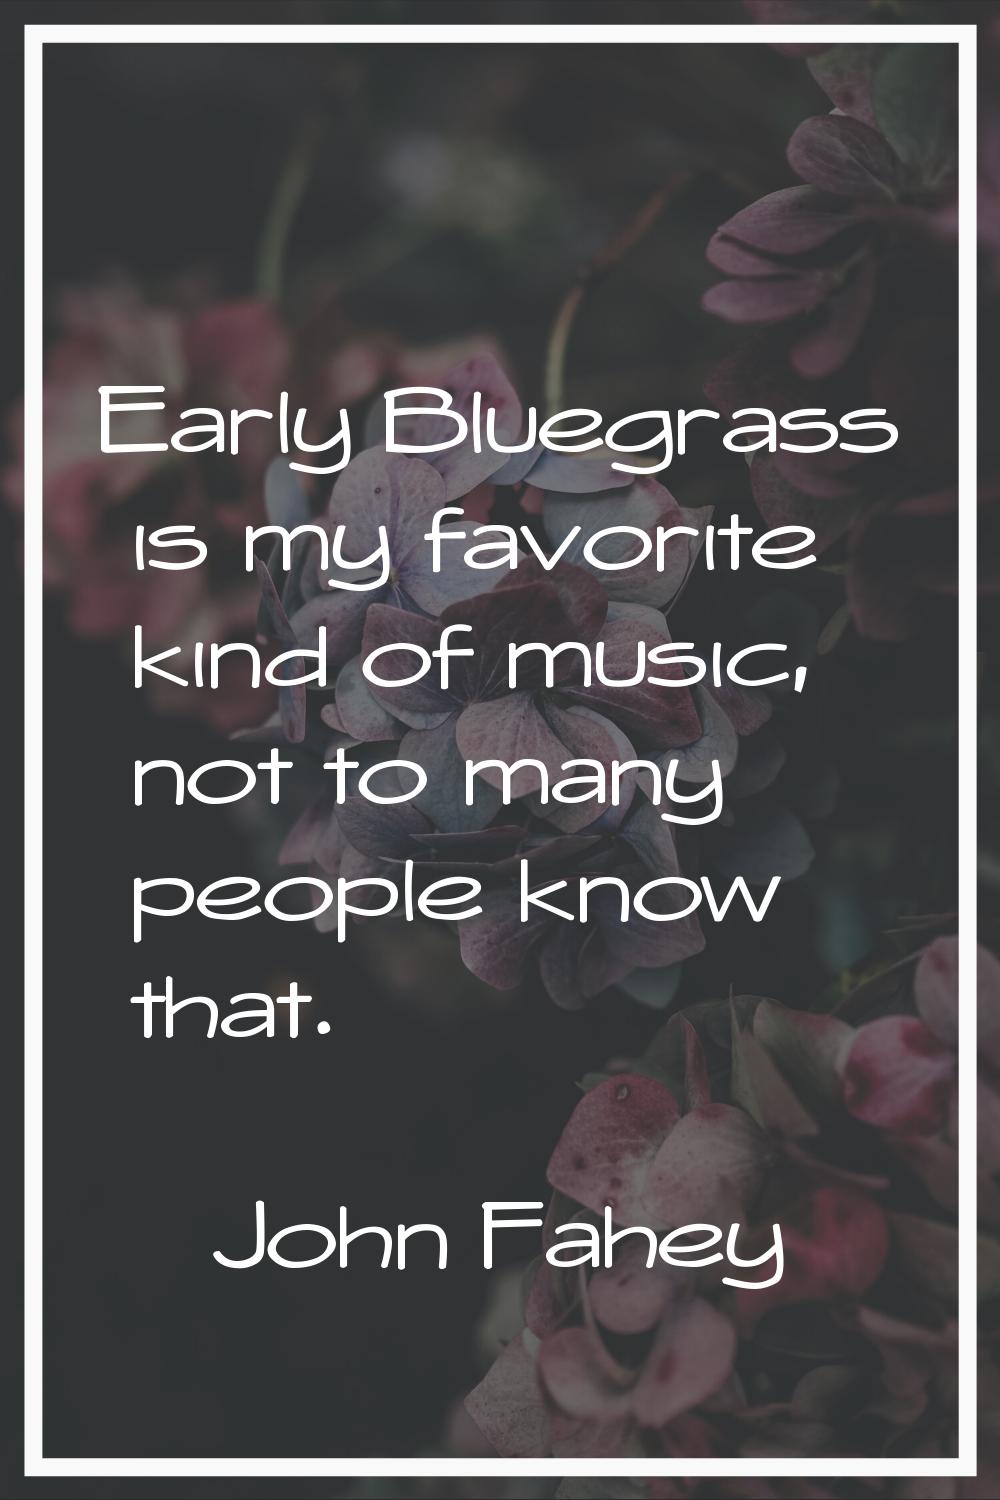 Early Bluegrass is my favorite kind of music, not to many people know that.